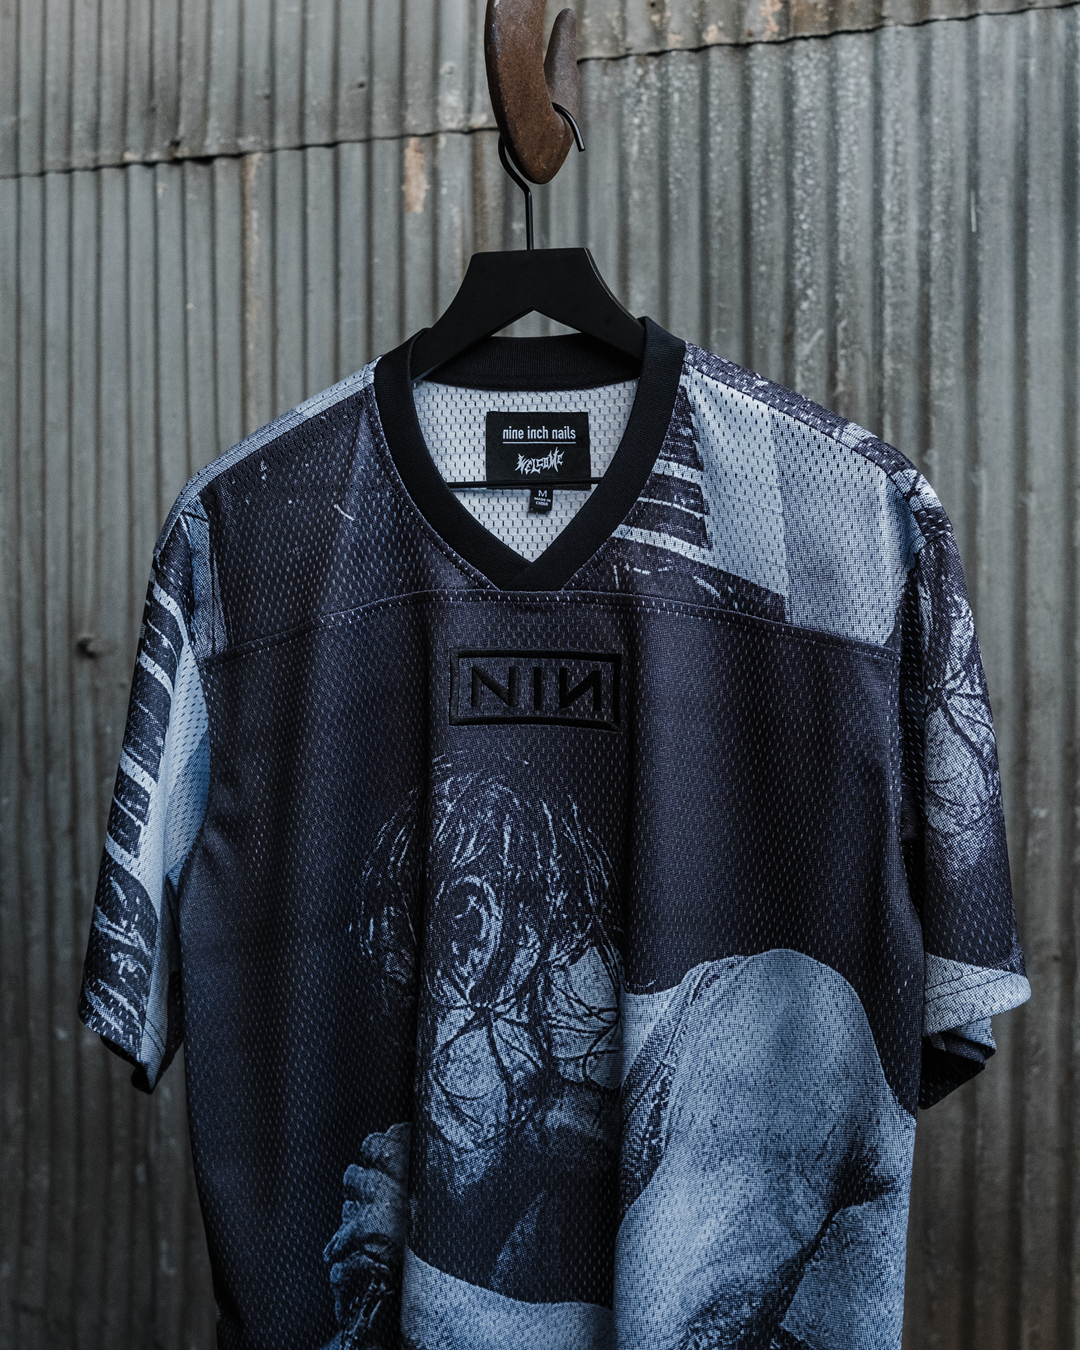 WELCOME X NINE INCH NAILS - CLOSER MESH FOOTBALL JERSEY